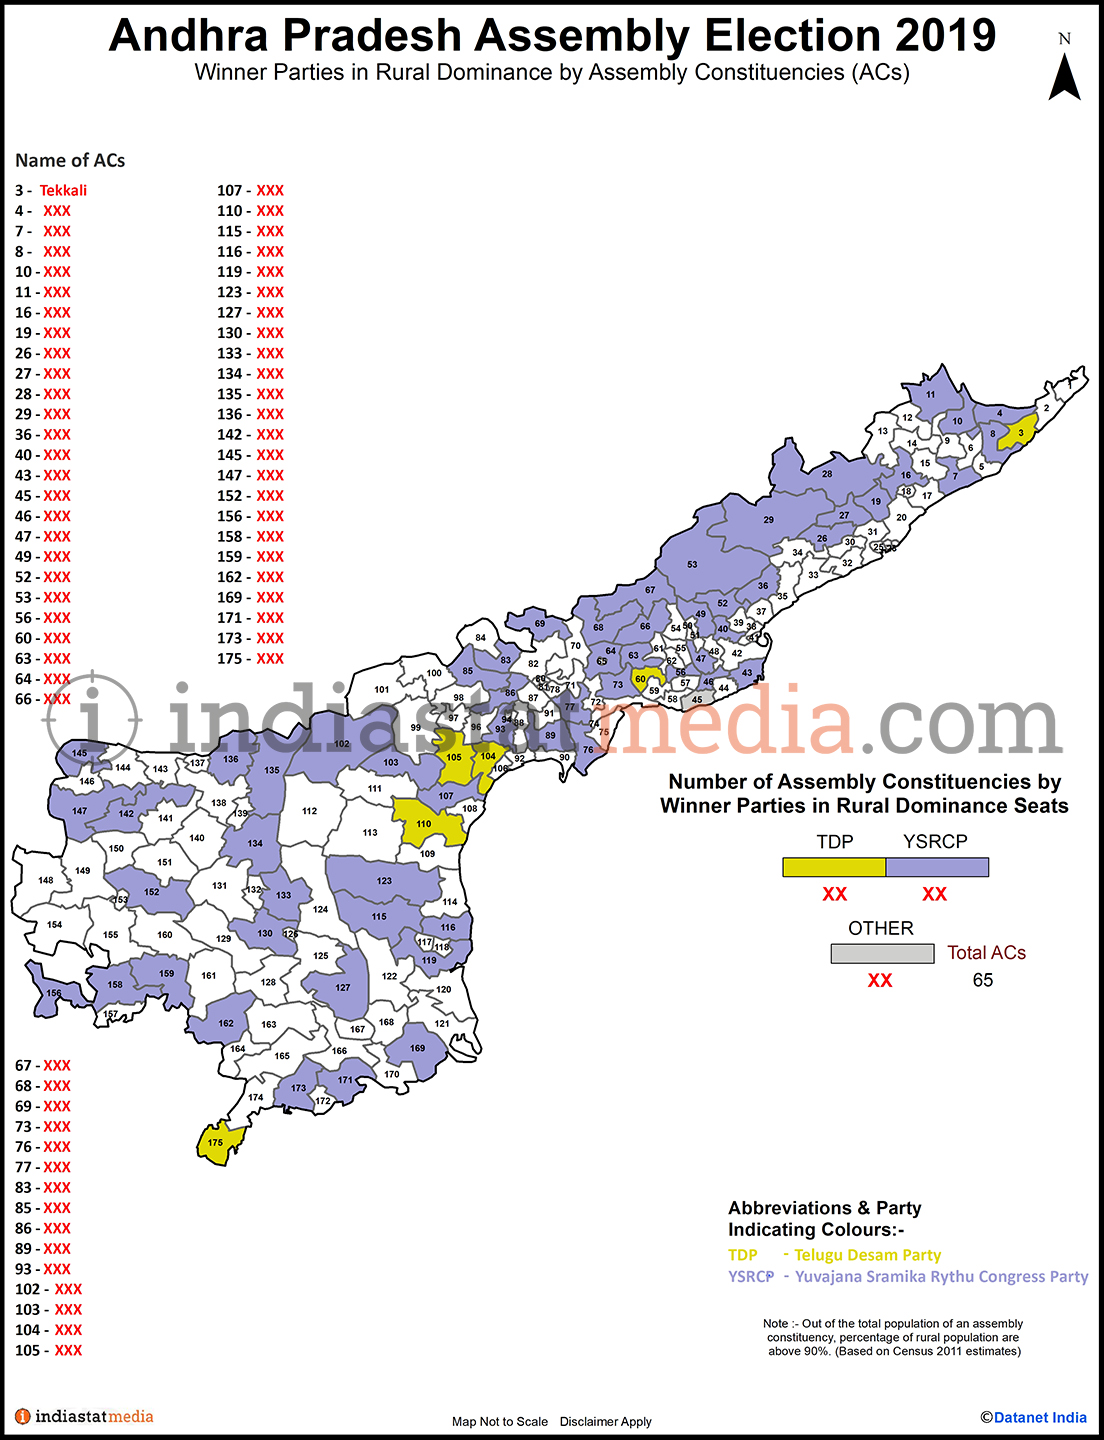 Winner Parties in Rural Dominance Constituencies in Andhra Pradesh (Assembly Election - 2019)